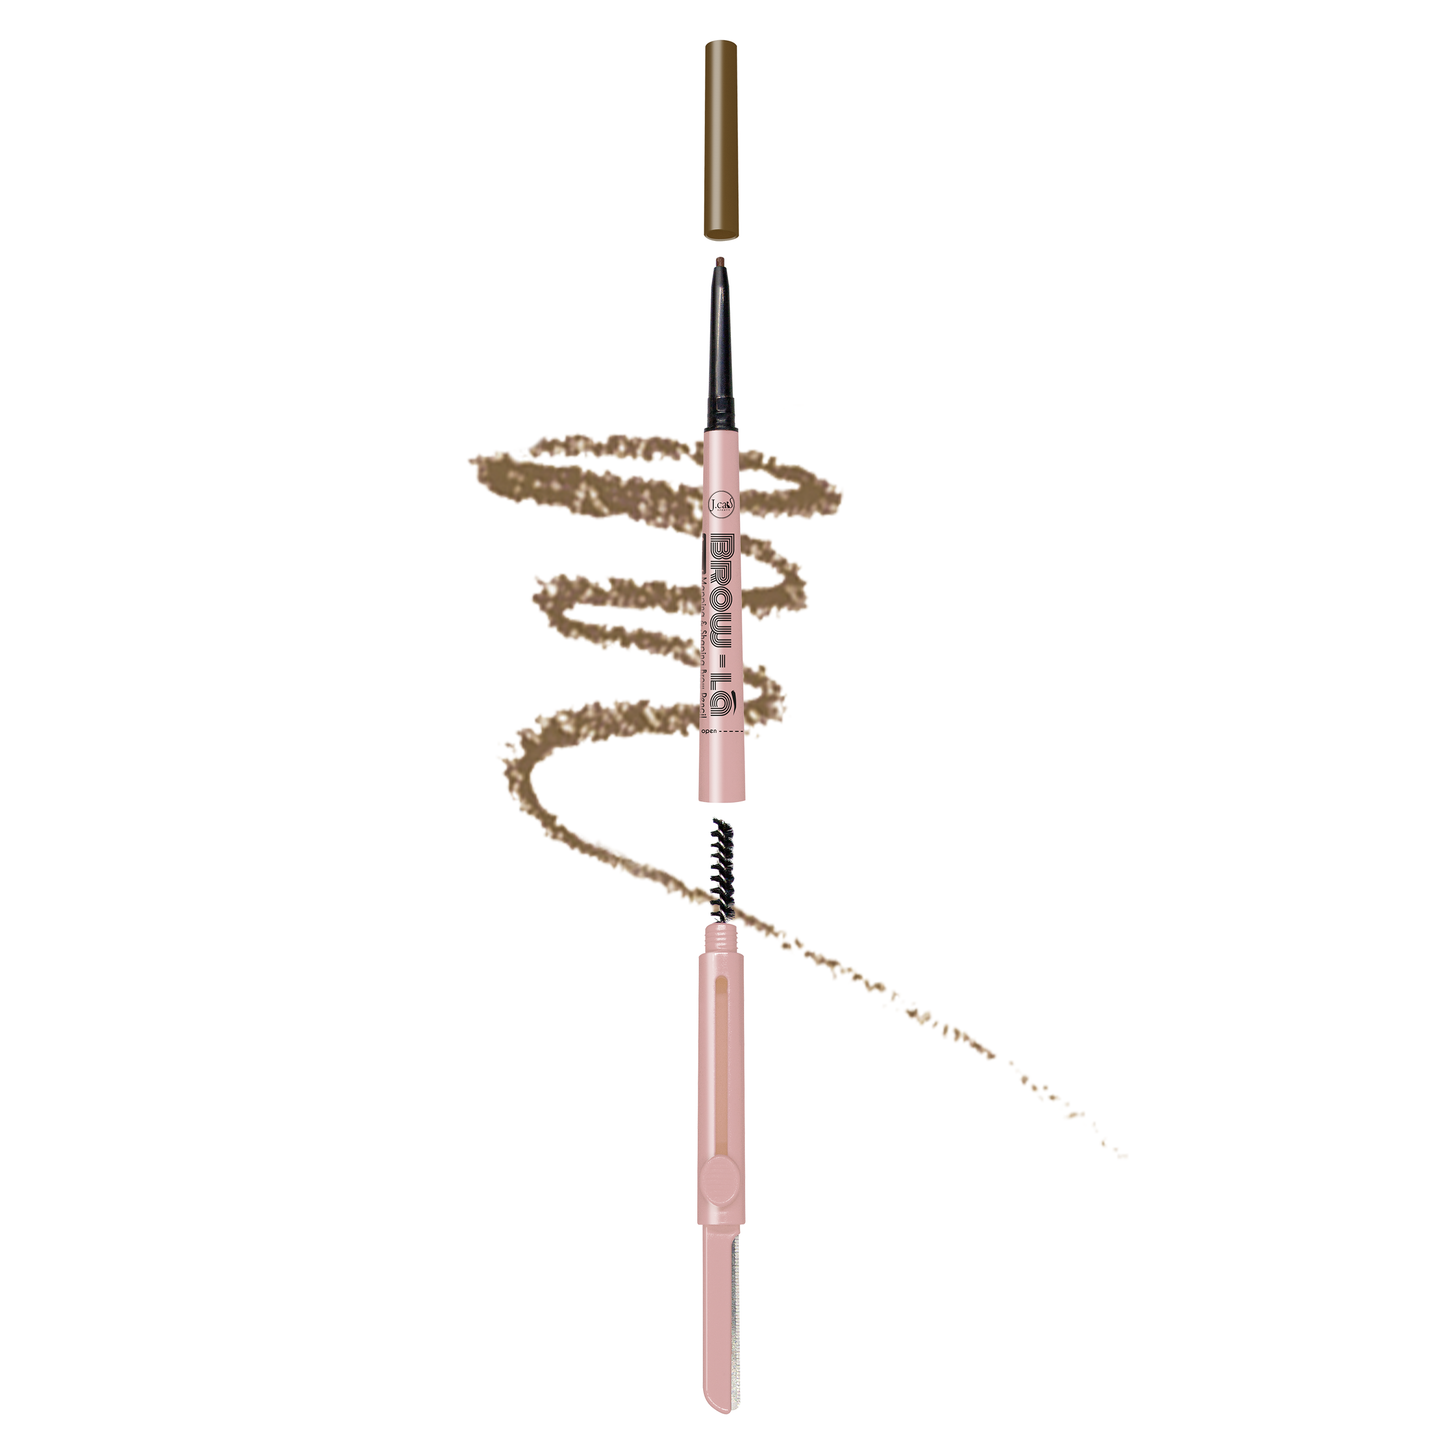 3 in 1 Mapping & Shaping Brow Pencil